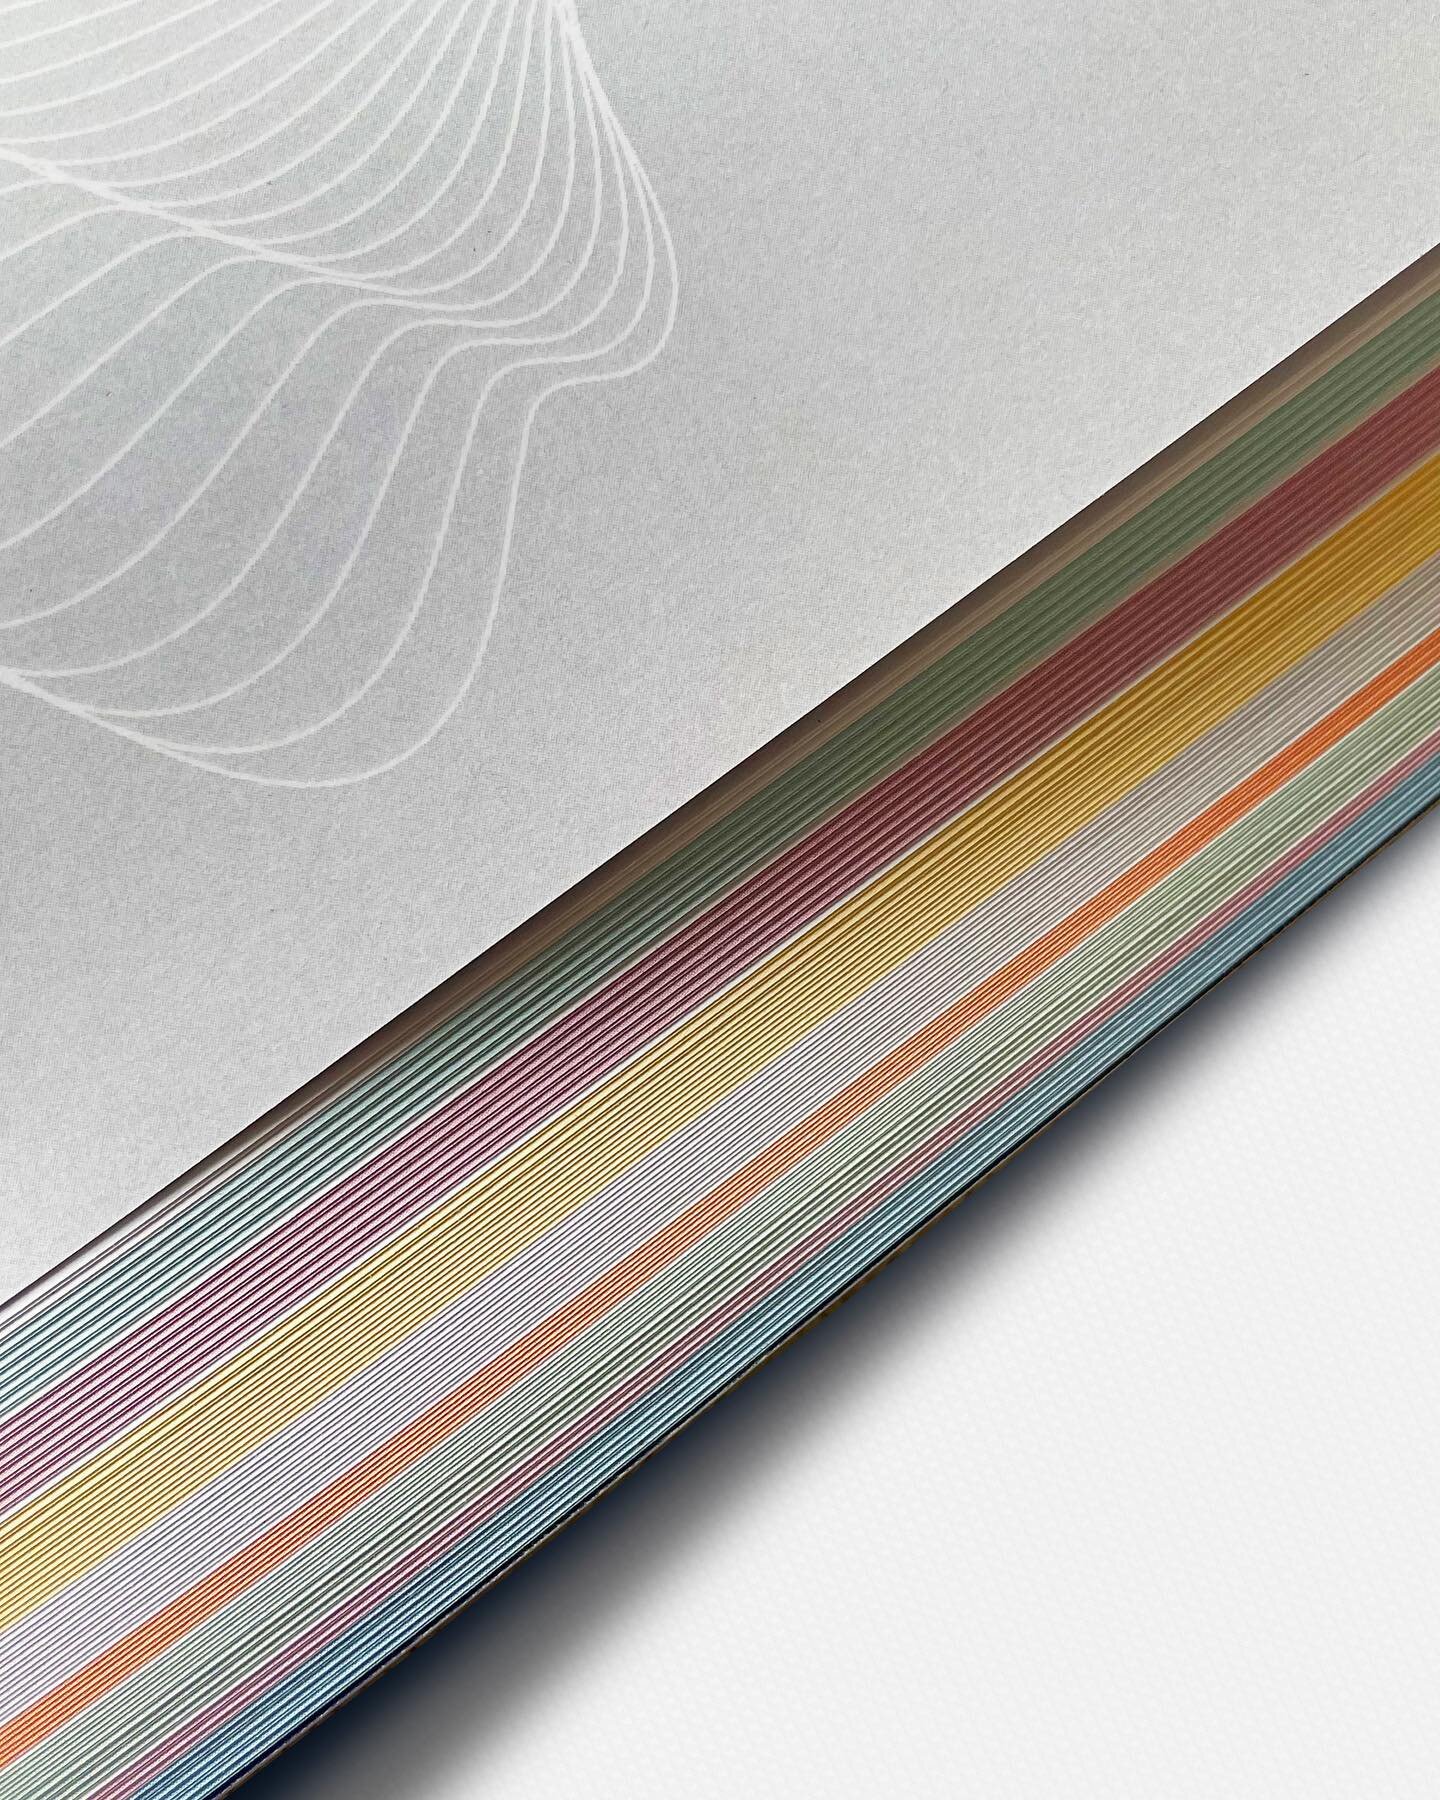 When using a small gradient at the outer edge of each page you artificially create this edge painting effect! 📙. We combined each colour to another chapter and there you have it, table of contents on the edge of the book! 

Thanks to @studiowinter &